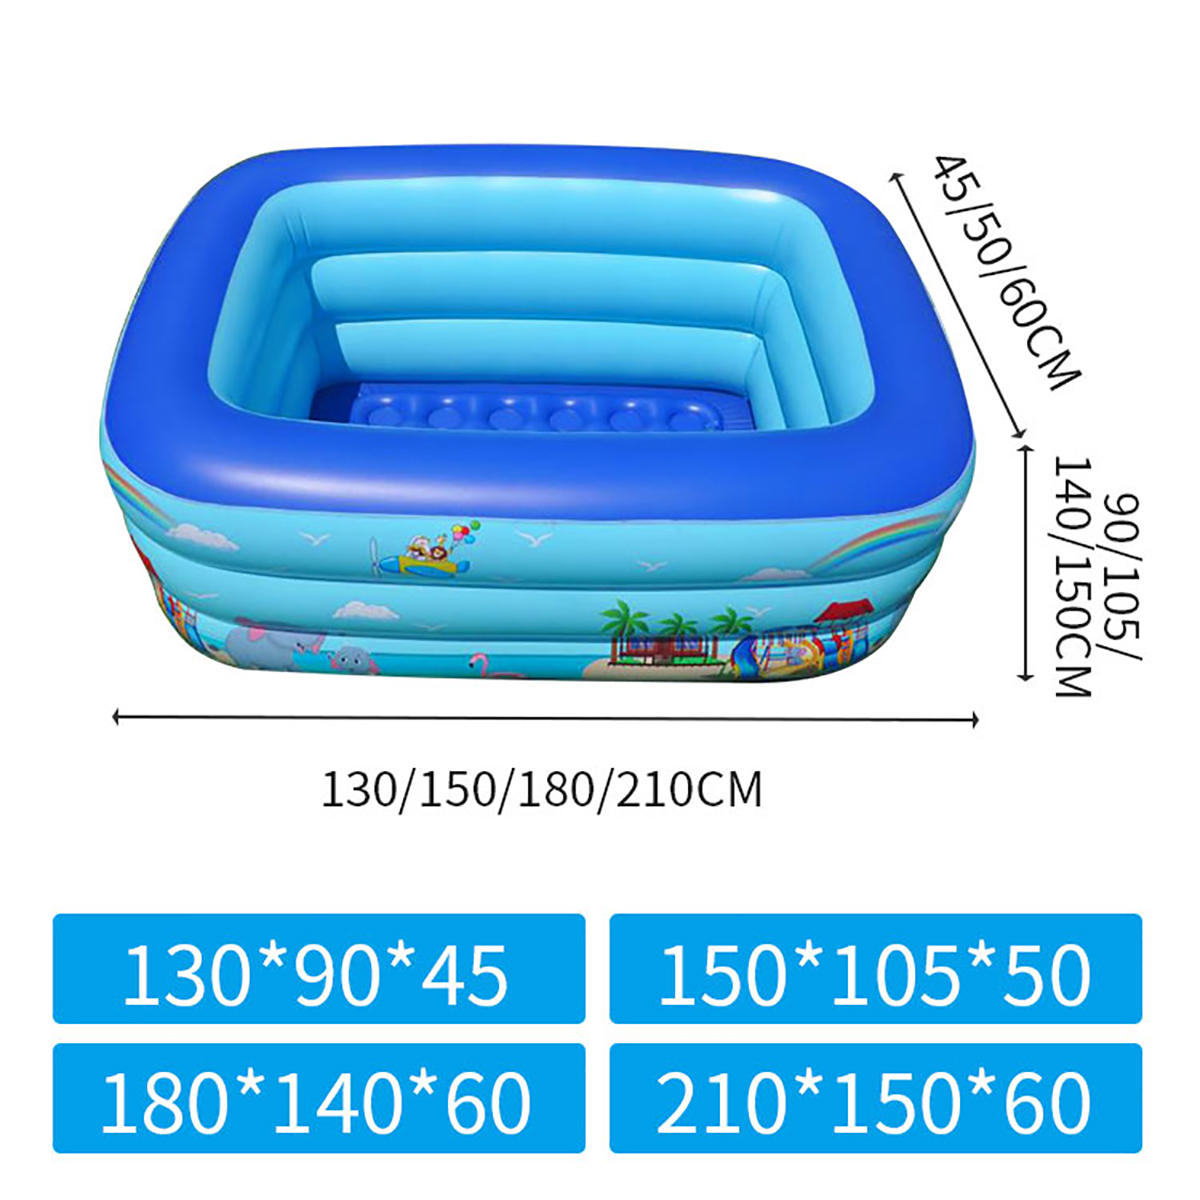 Thickened-PVC-Inflatable-Swimming-Pool-Childrens-Swimming-Pool-Bath-Tub-Outdoor-Indoor-Play-Pool-Chi-1856509-2